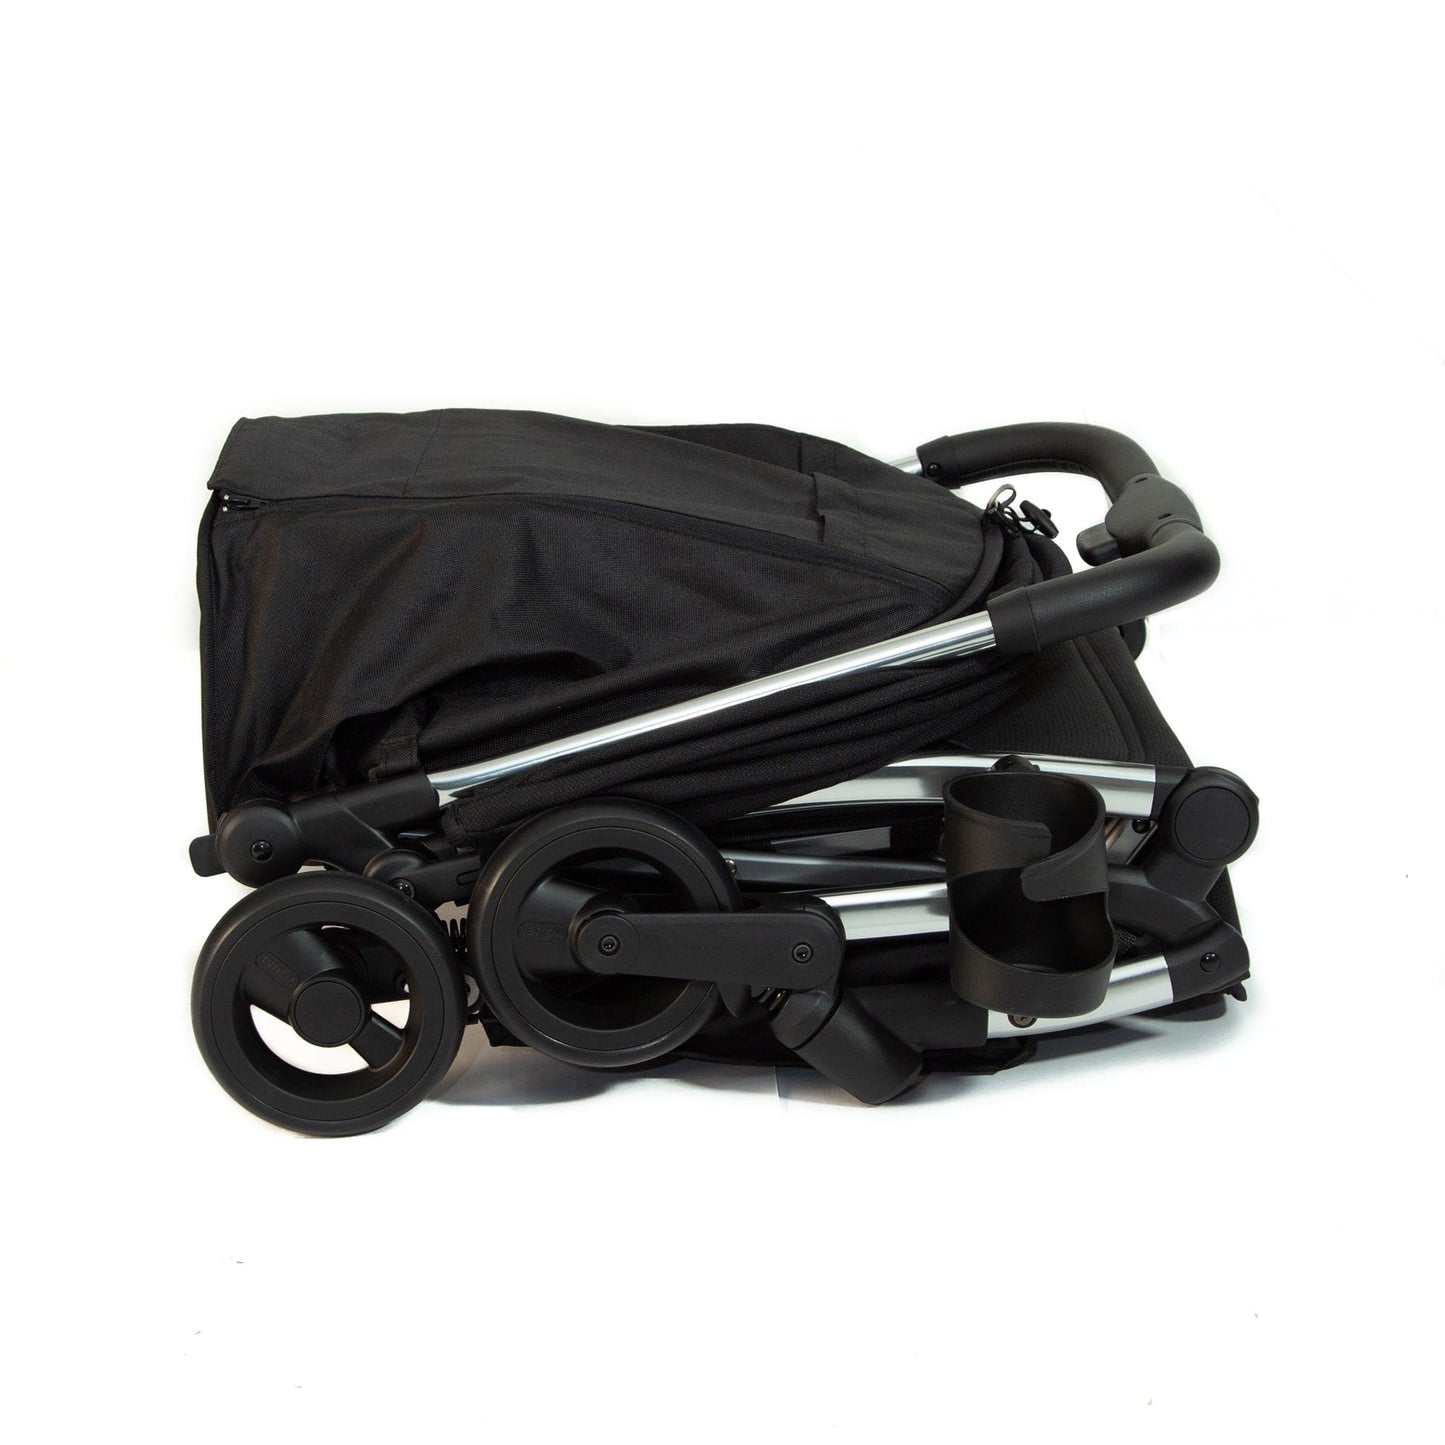 Pikkaboo Youbi Youbi Toddler German Travel Light Stroller-Black with New Born Attachment